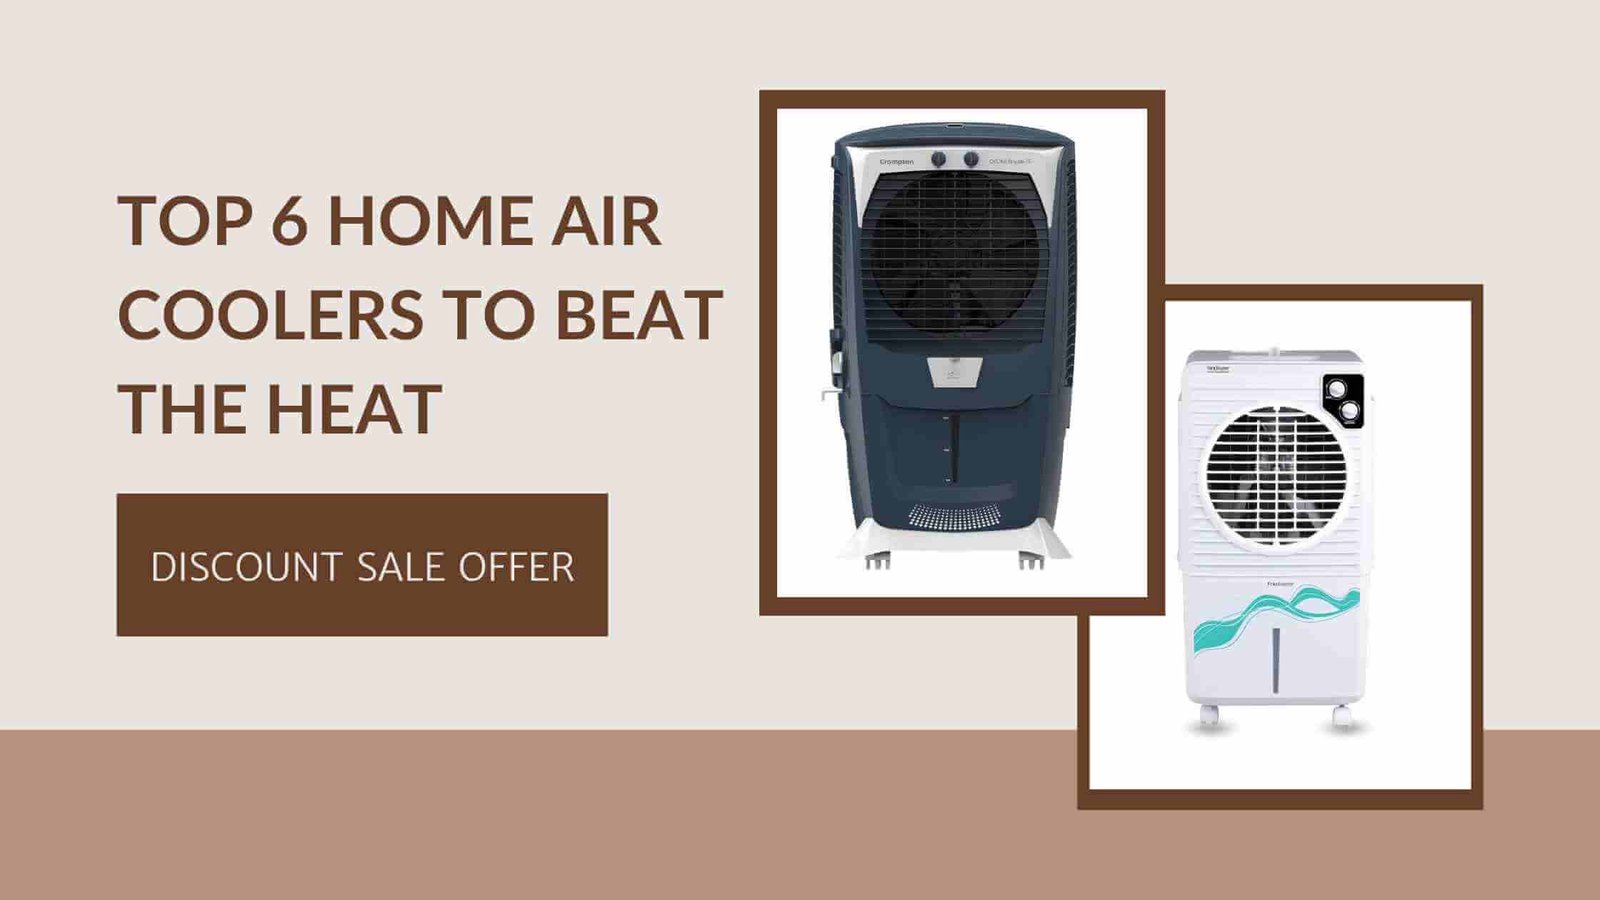 TOP 6 HOME AIR COOLERS TO BEAT THE HEAT